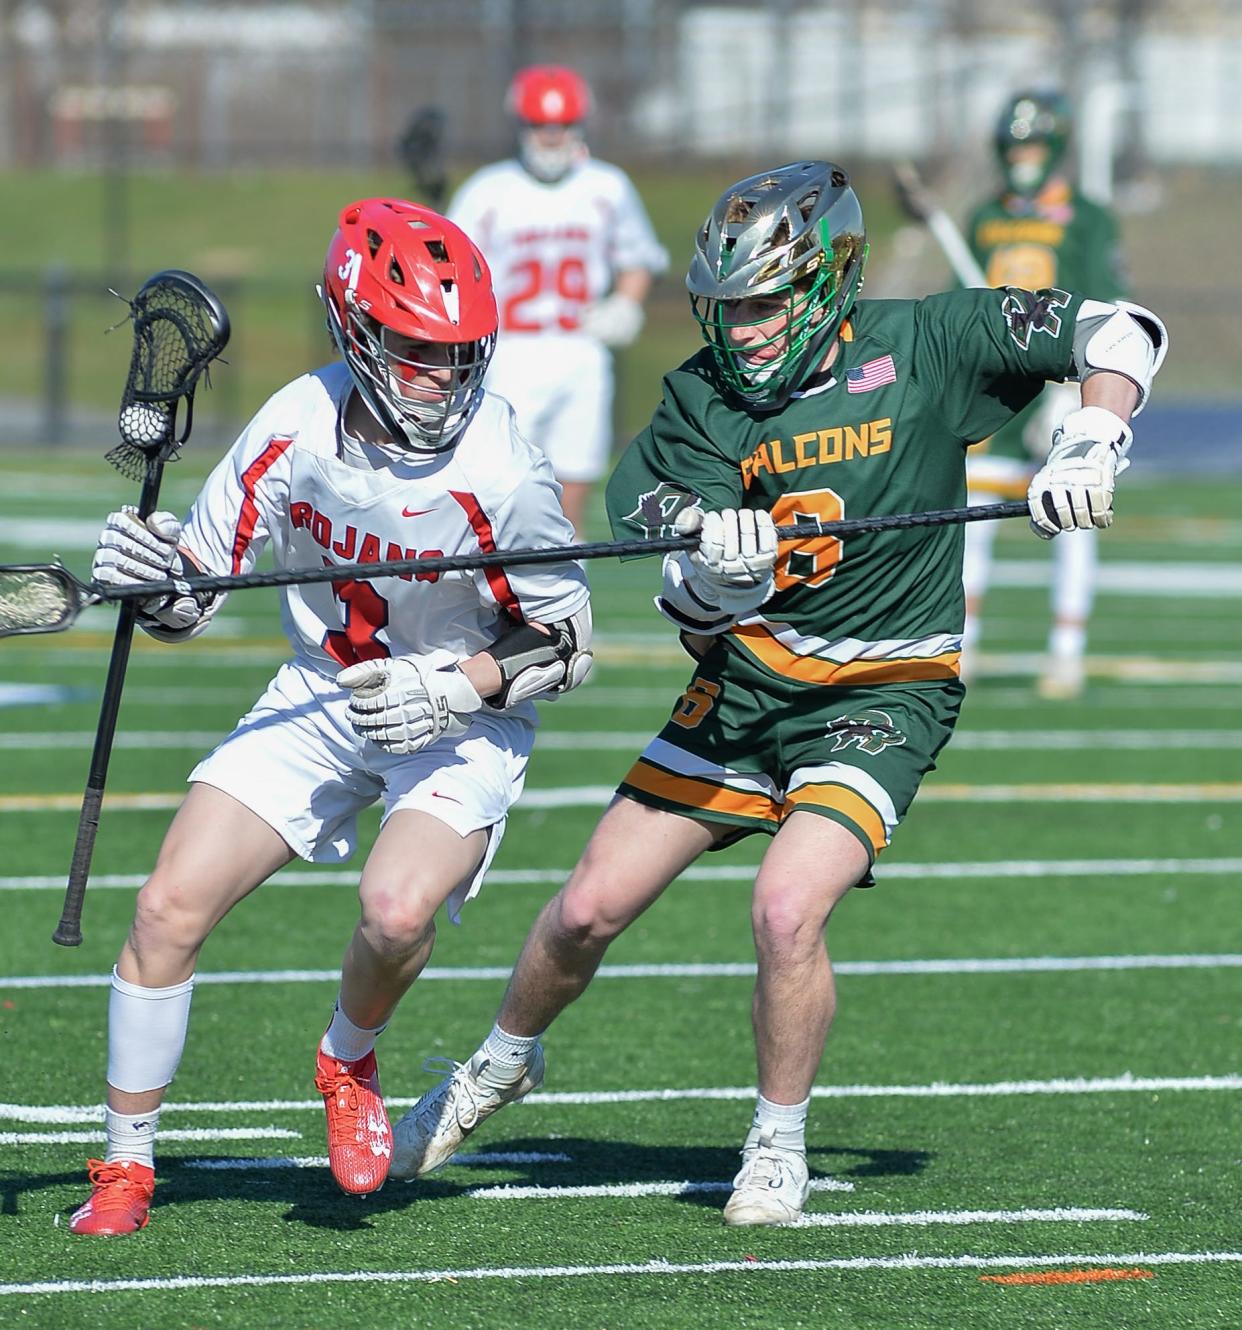 Bridgewater-Raynham’s Brendan Rosher is checked by Dighton-Rehoboth’s Noah Bastis during a non-league game on April 10, 2023.